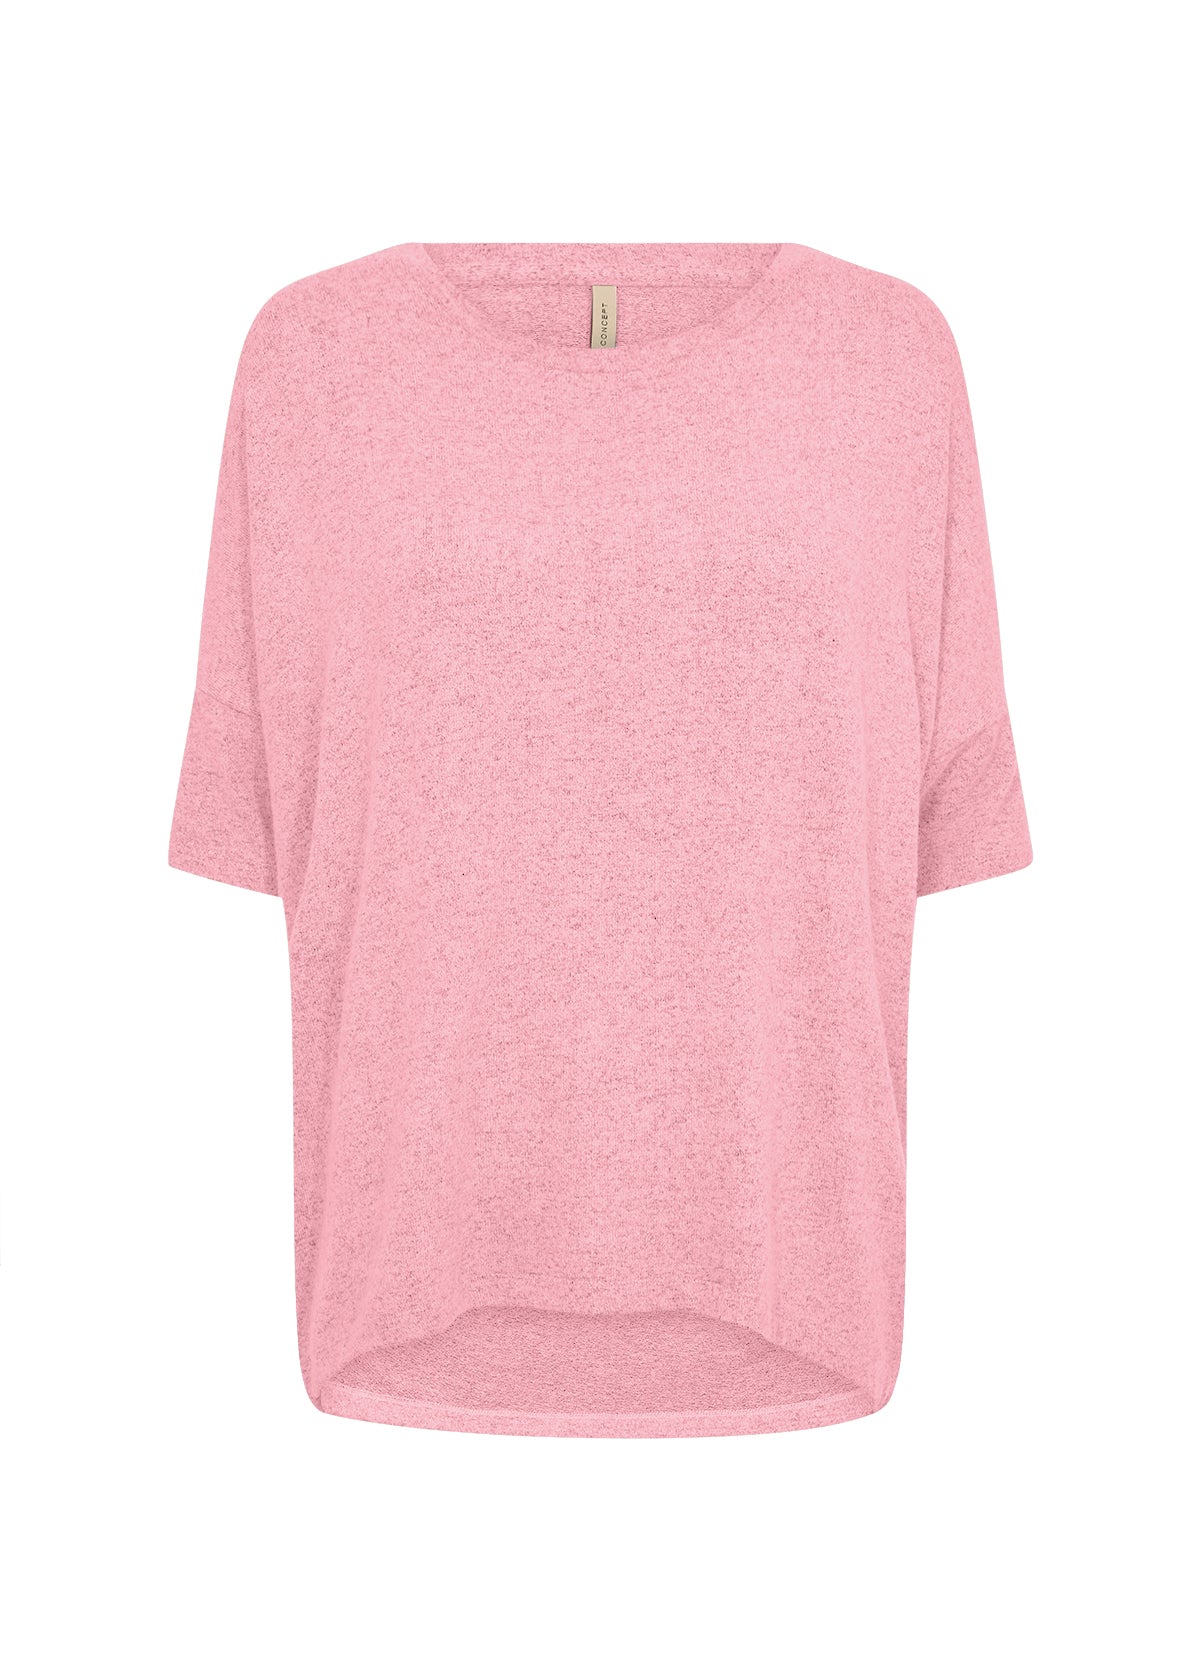 Soyaconcept 3/4 Sleeve Soft Biara Top in Pink